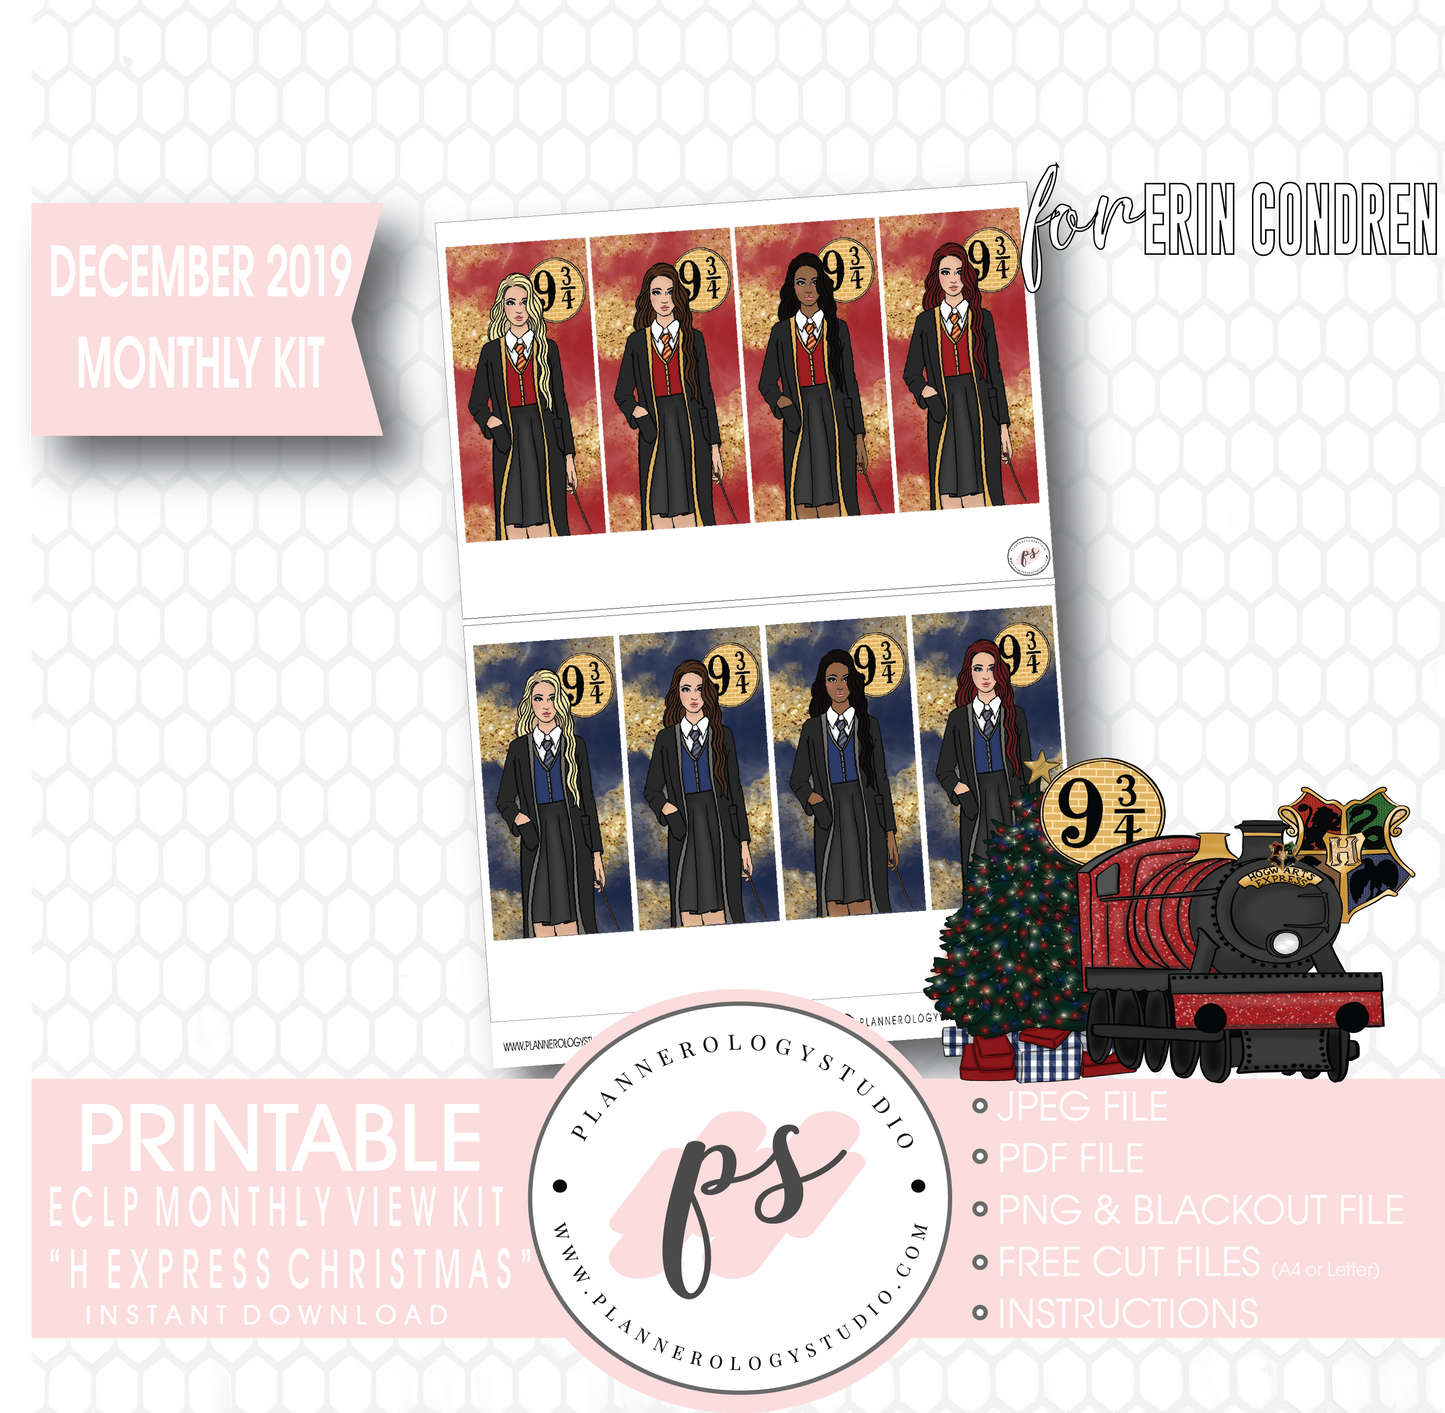 H Express Christmas (Harry Potter) Christmas December 2019 Monthly View Kit Digital Printable Planner Stickers (for use with Erin Condren) - Plannerologystudio